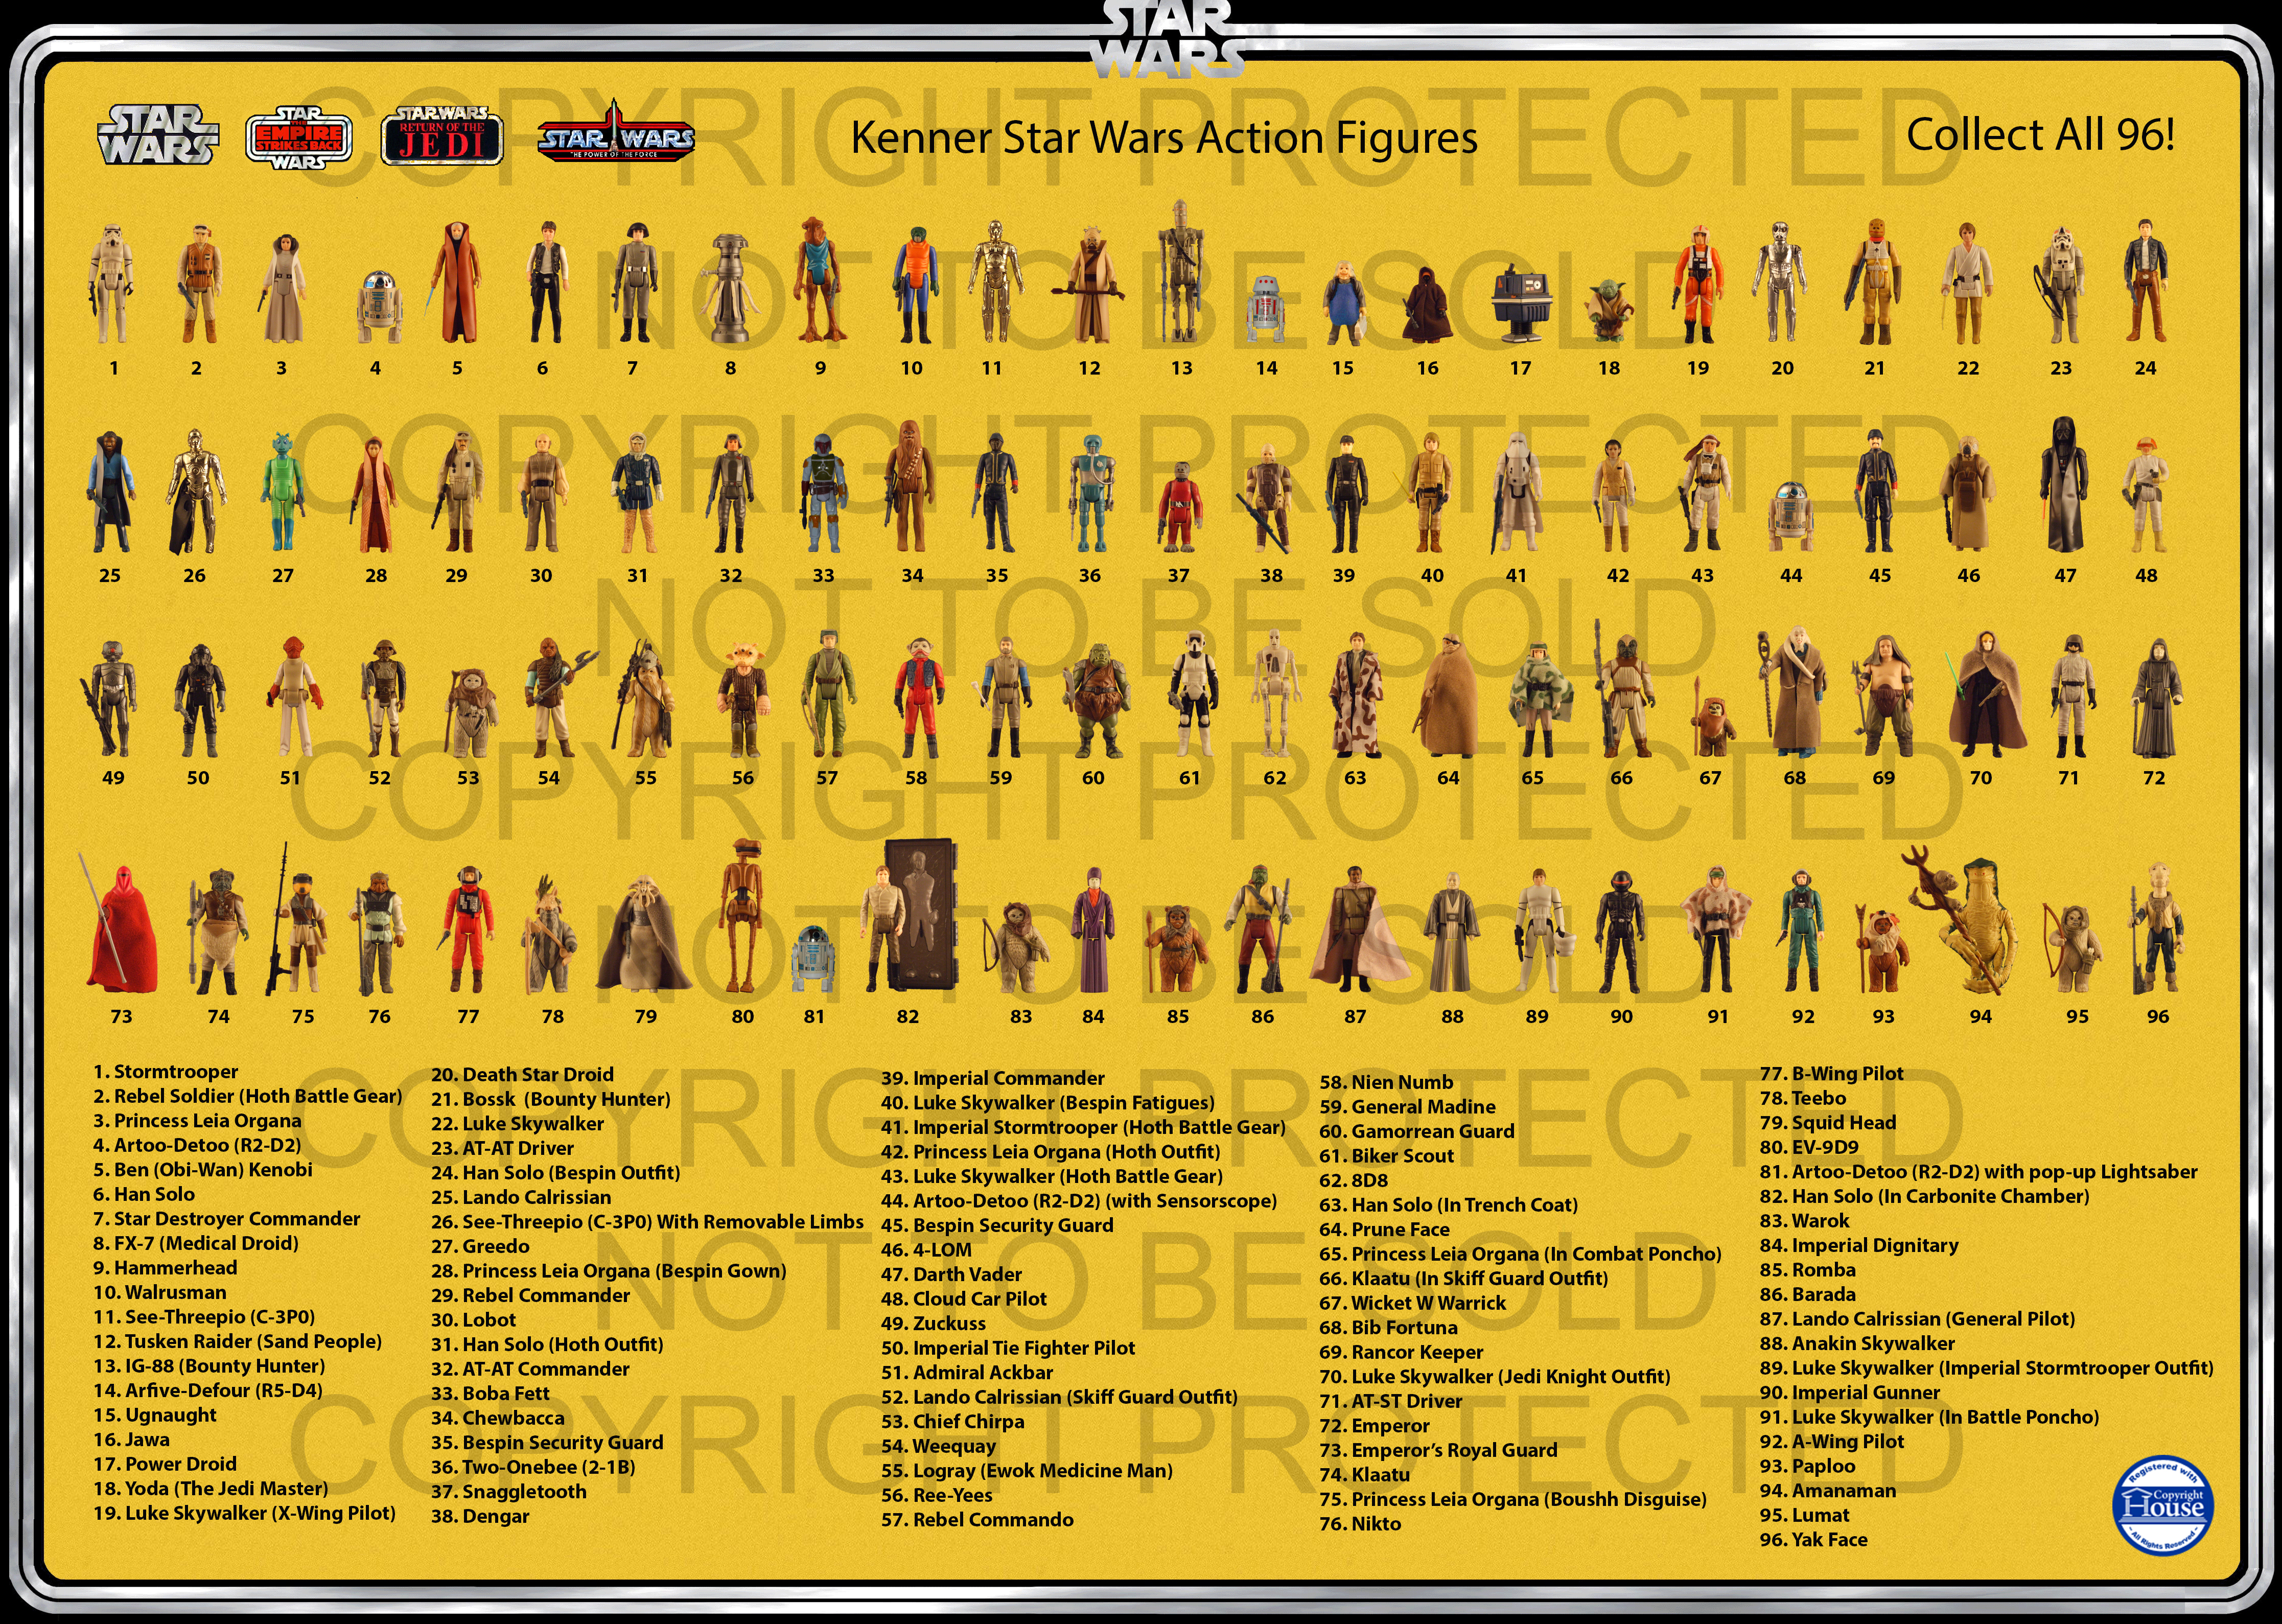 Star Wars Collection List Hotsell - www.escapeslacumbre.es 1696541426